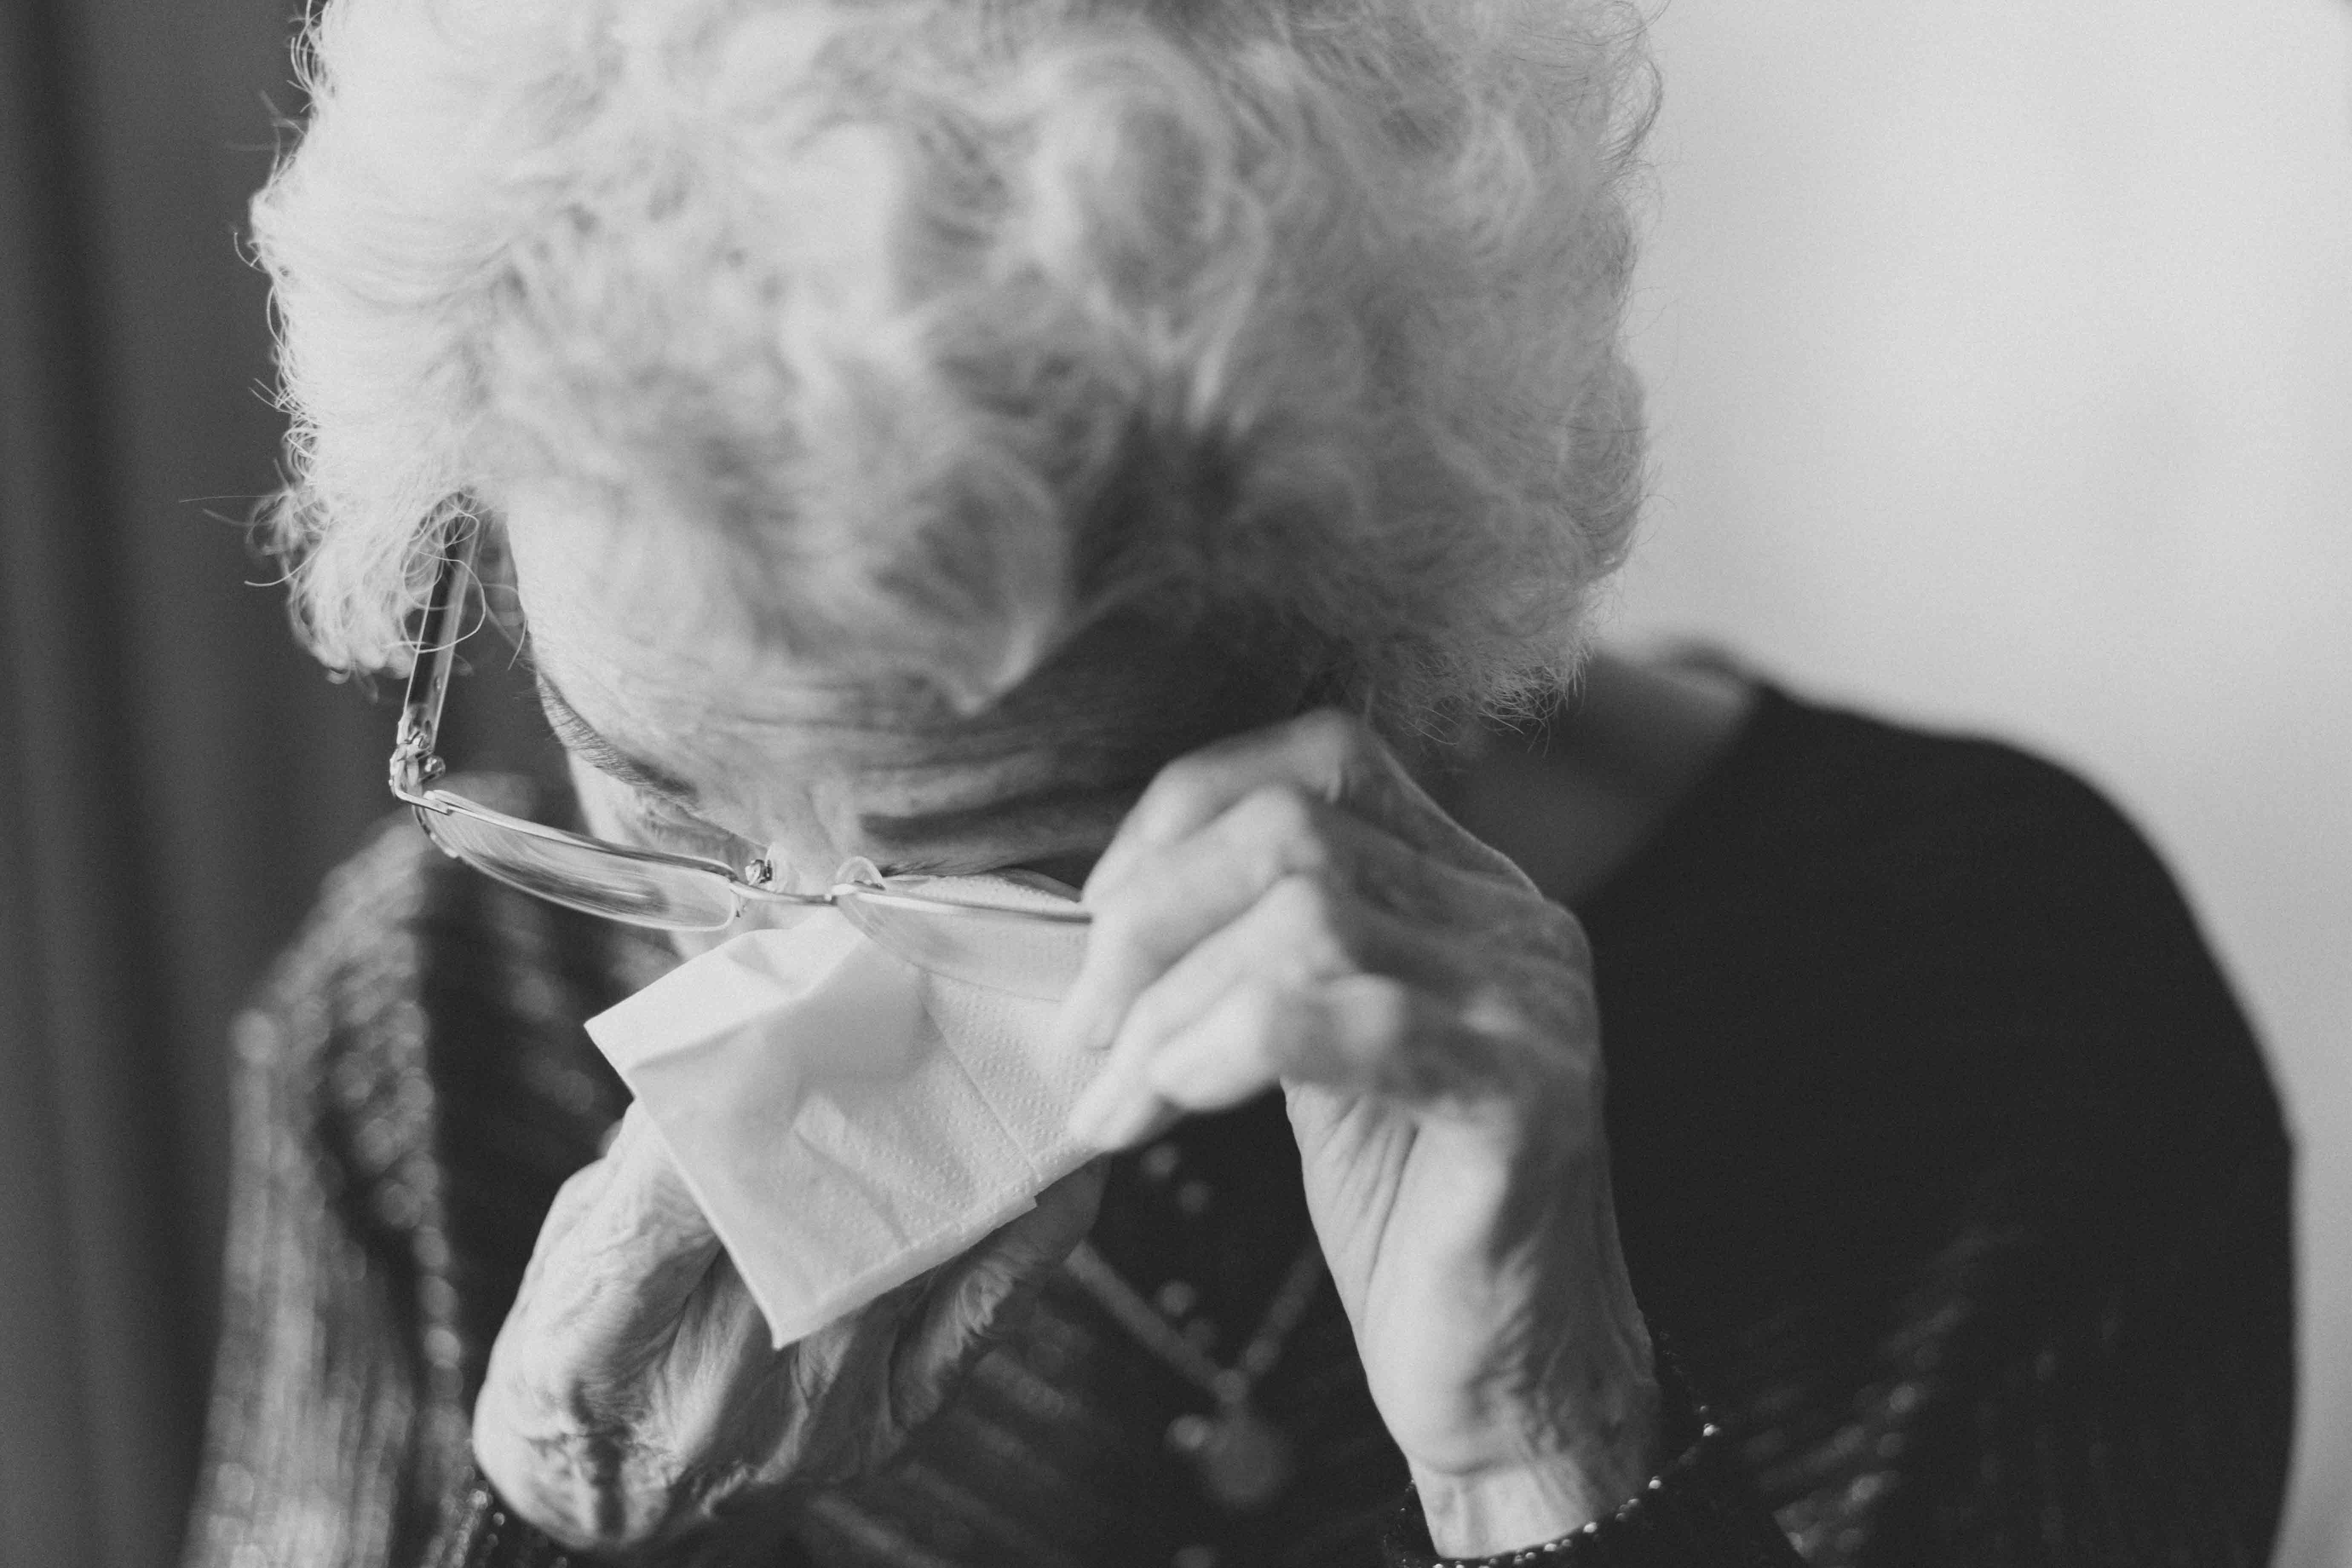 Elderly woman in glasses wiping eye with tissue; image by Jeremy Wong, via Unsplash.com.